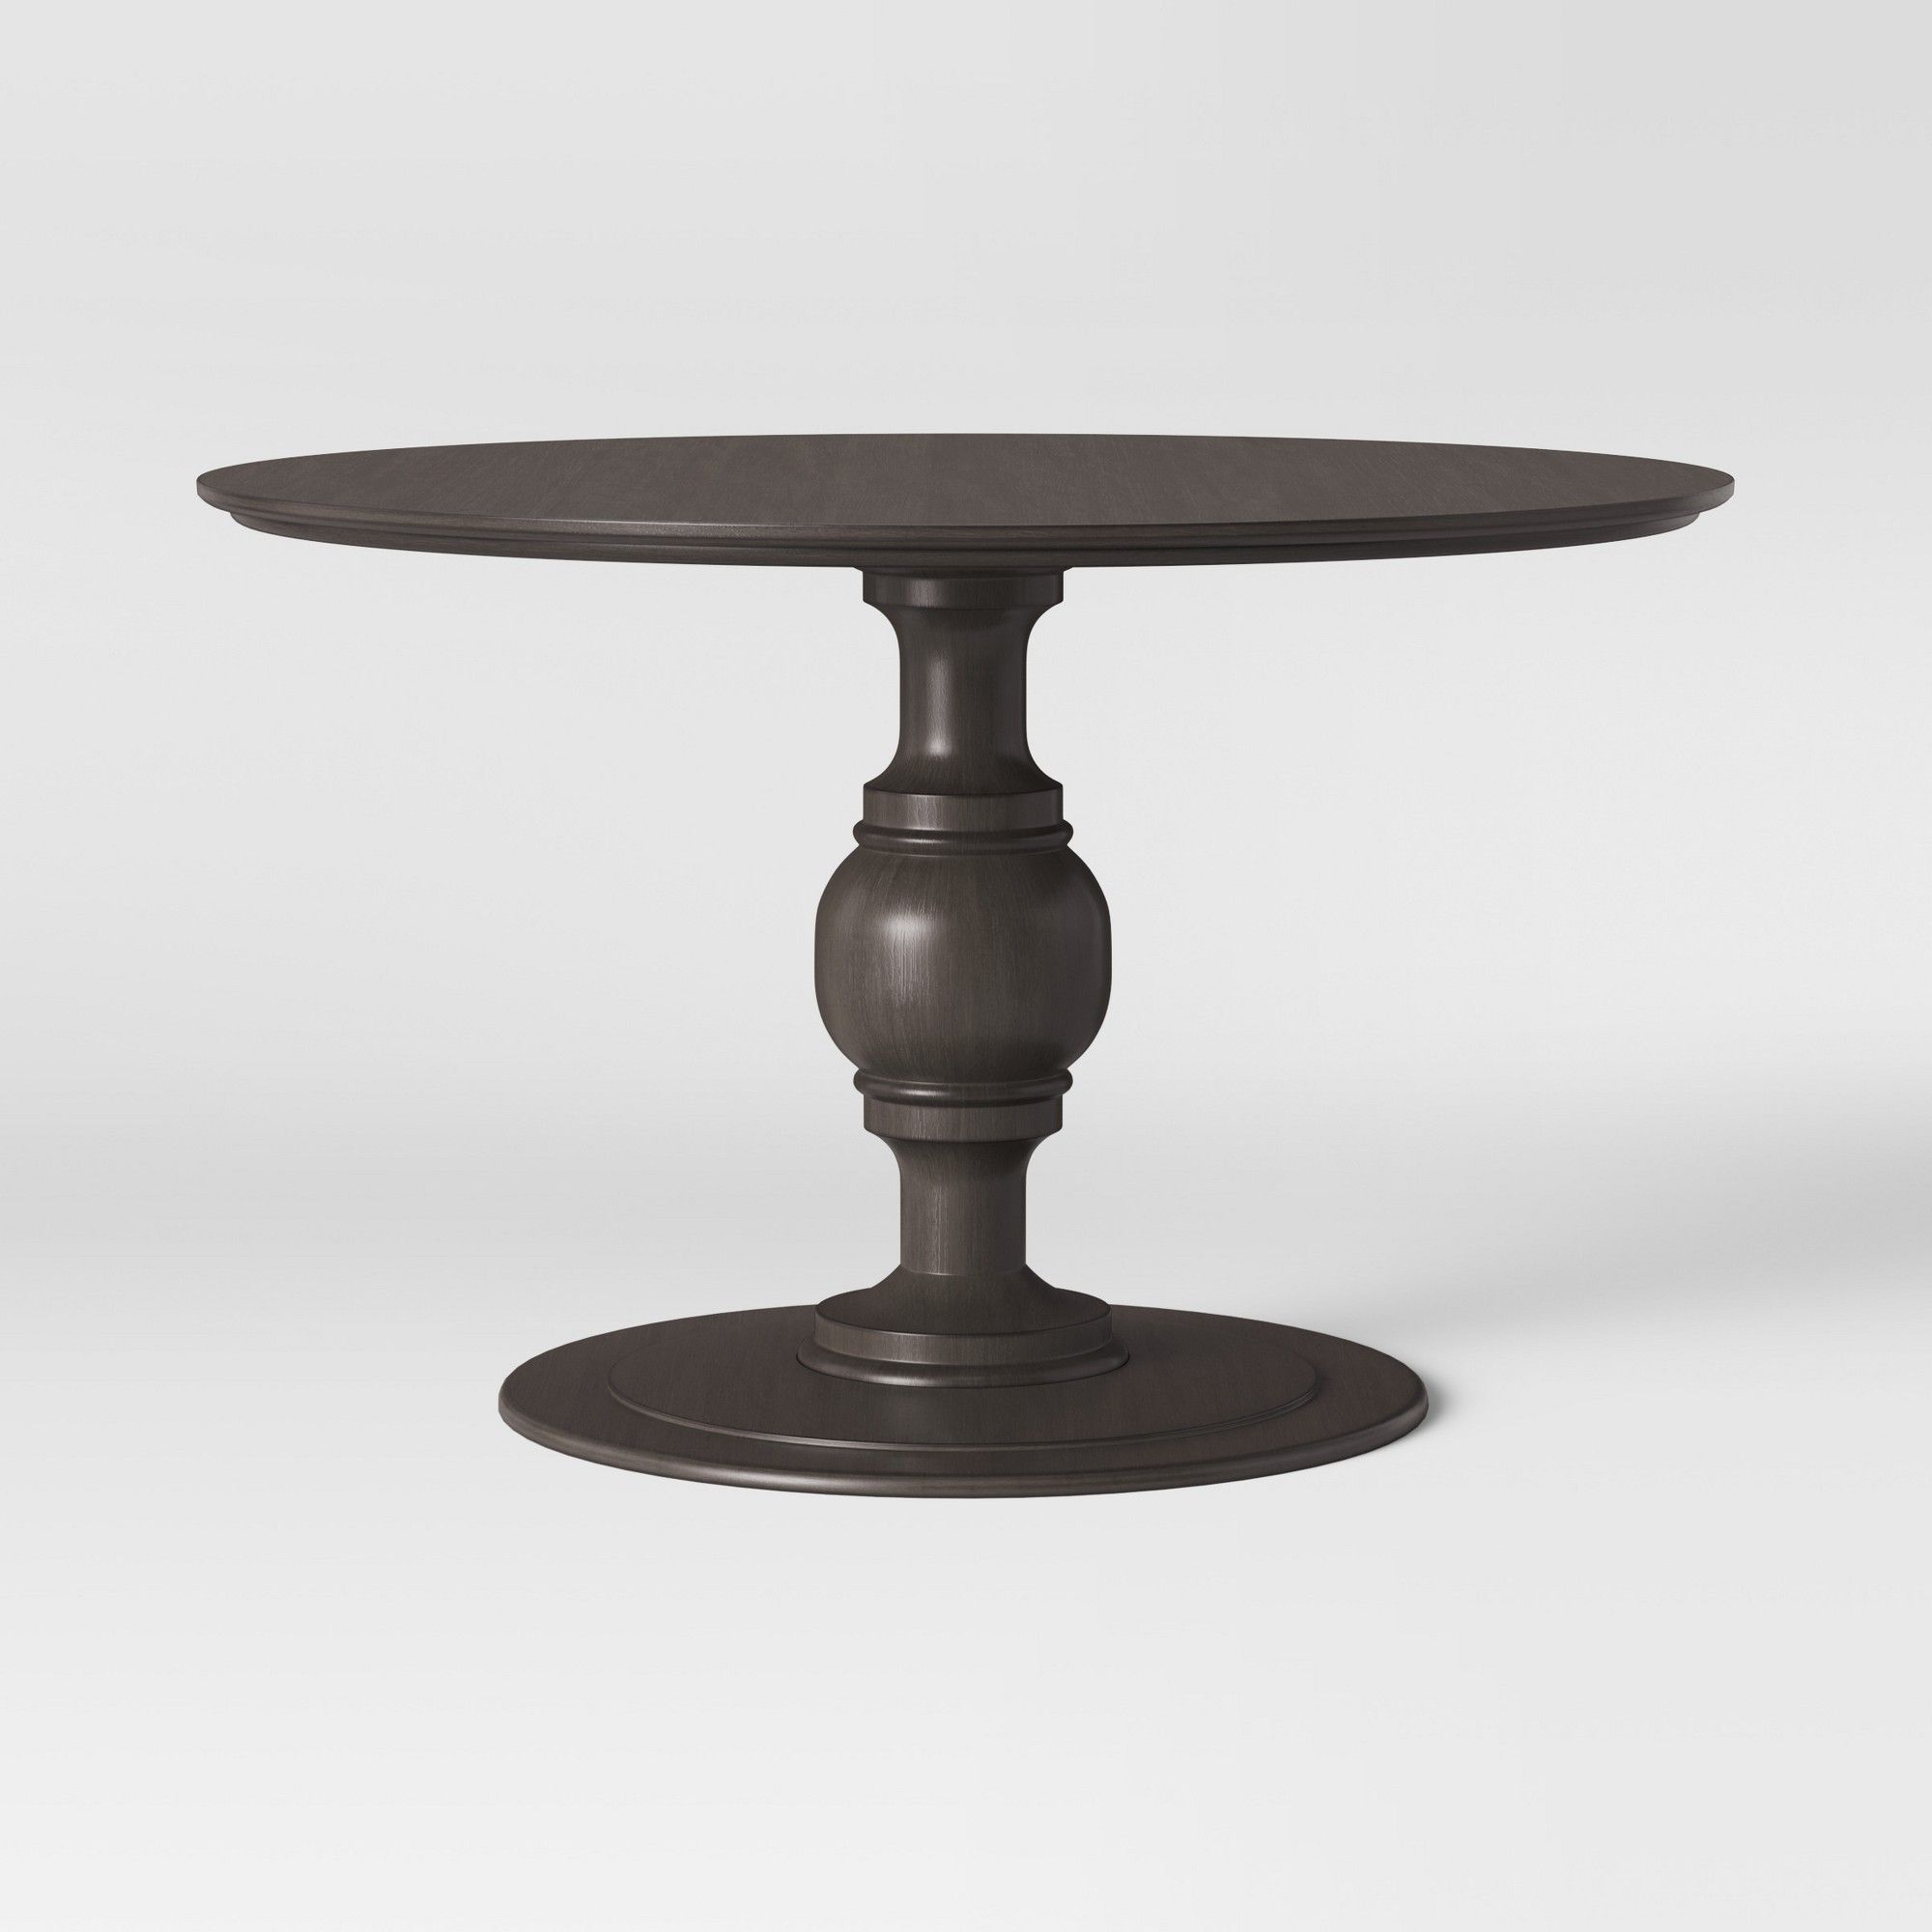 Byfield Pedestal Dining Table Reclaimed Oak Brown Within Most Recently Released Dawson Pedestal Tables (View 4 of 25)